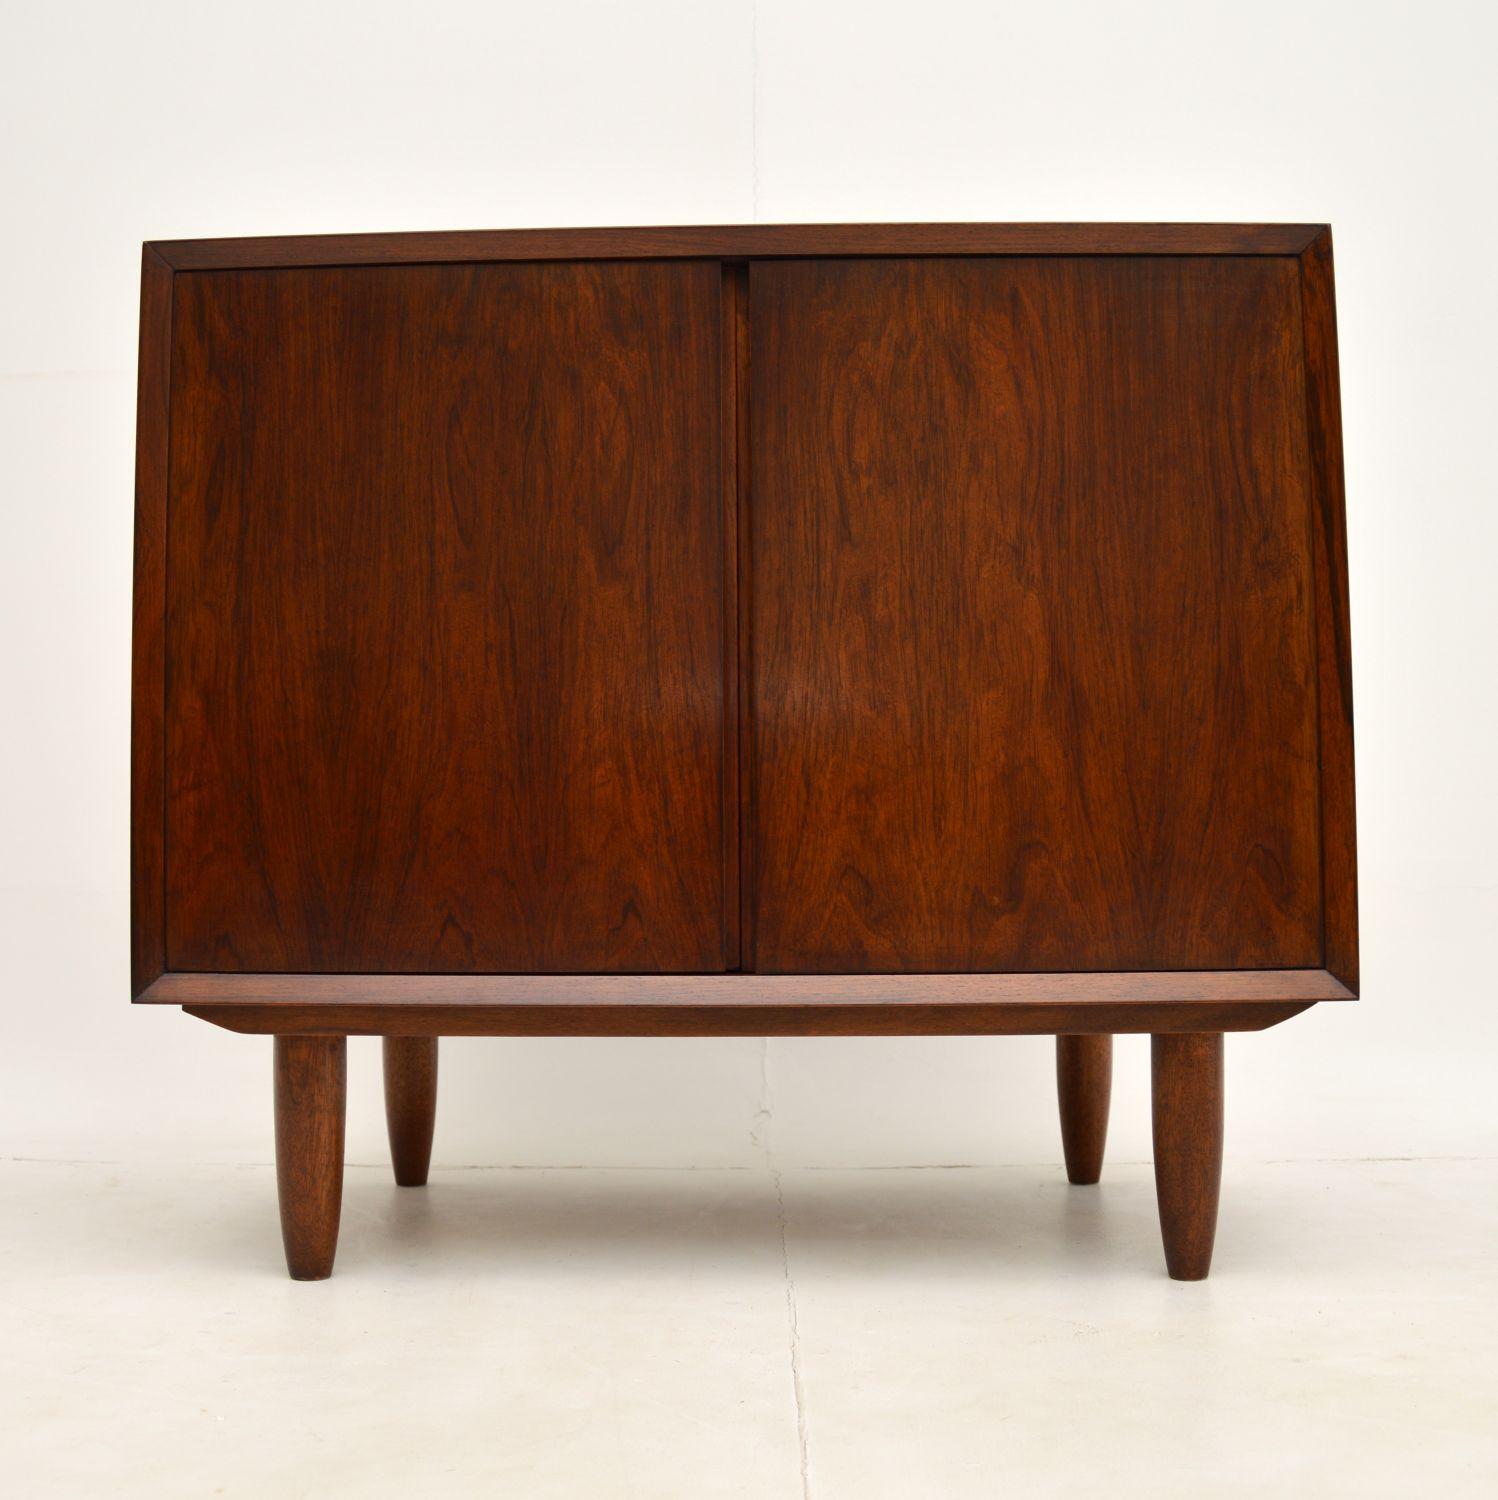 A stunning and top quality vintage Danish cabinet. This was made in Denmark in the 1960’s, it was designed by Poul Cadovius.

It’s is a great size and is extremely well made. The wood grain patterns are beautiful throughout, even on the